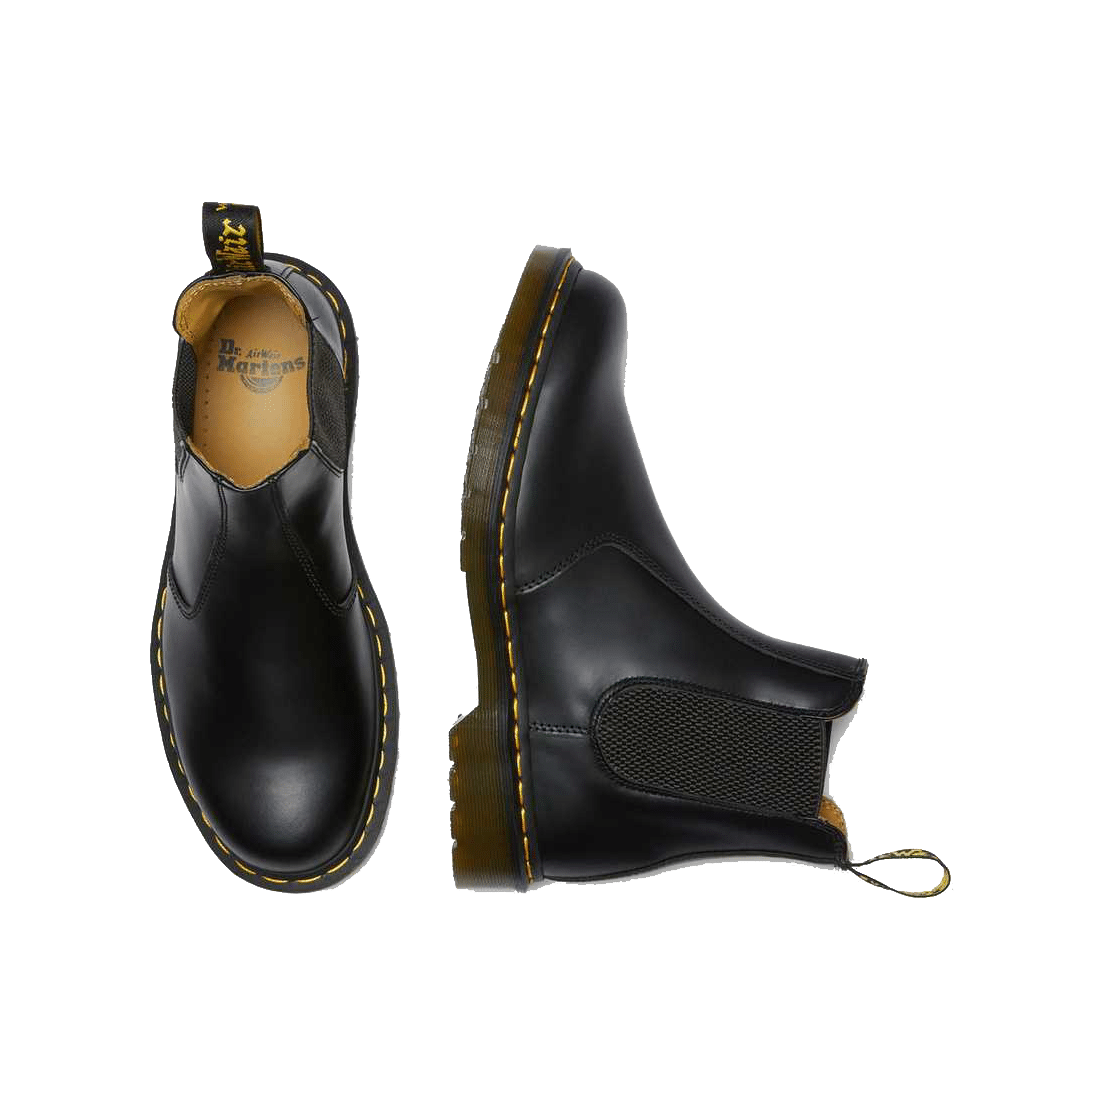 Dr. Marten 2976 Smooth Leather Chelsea Boots